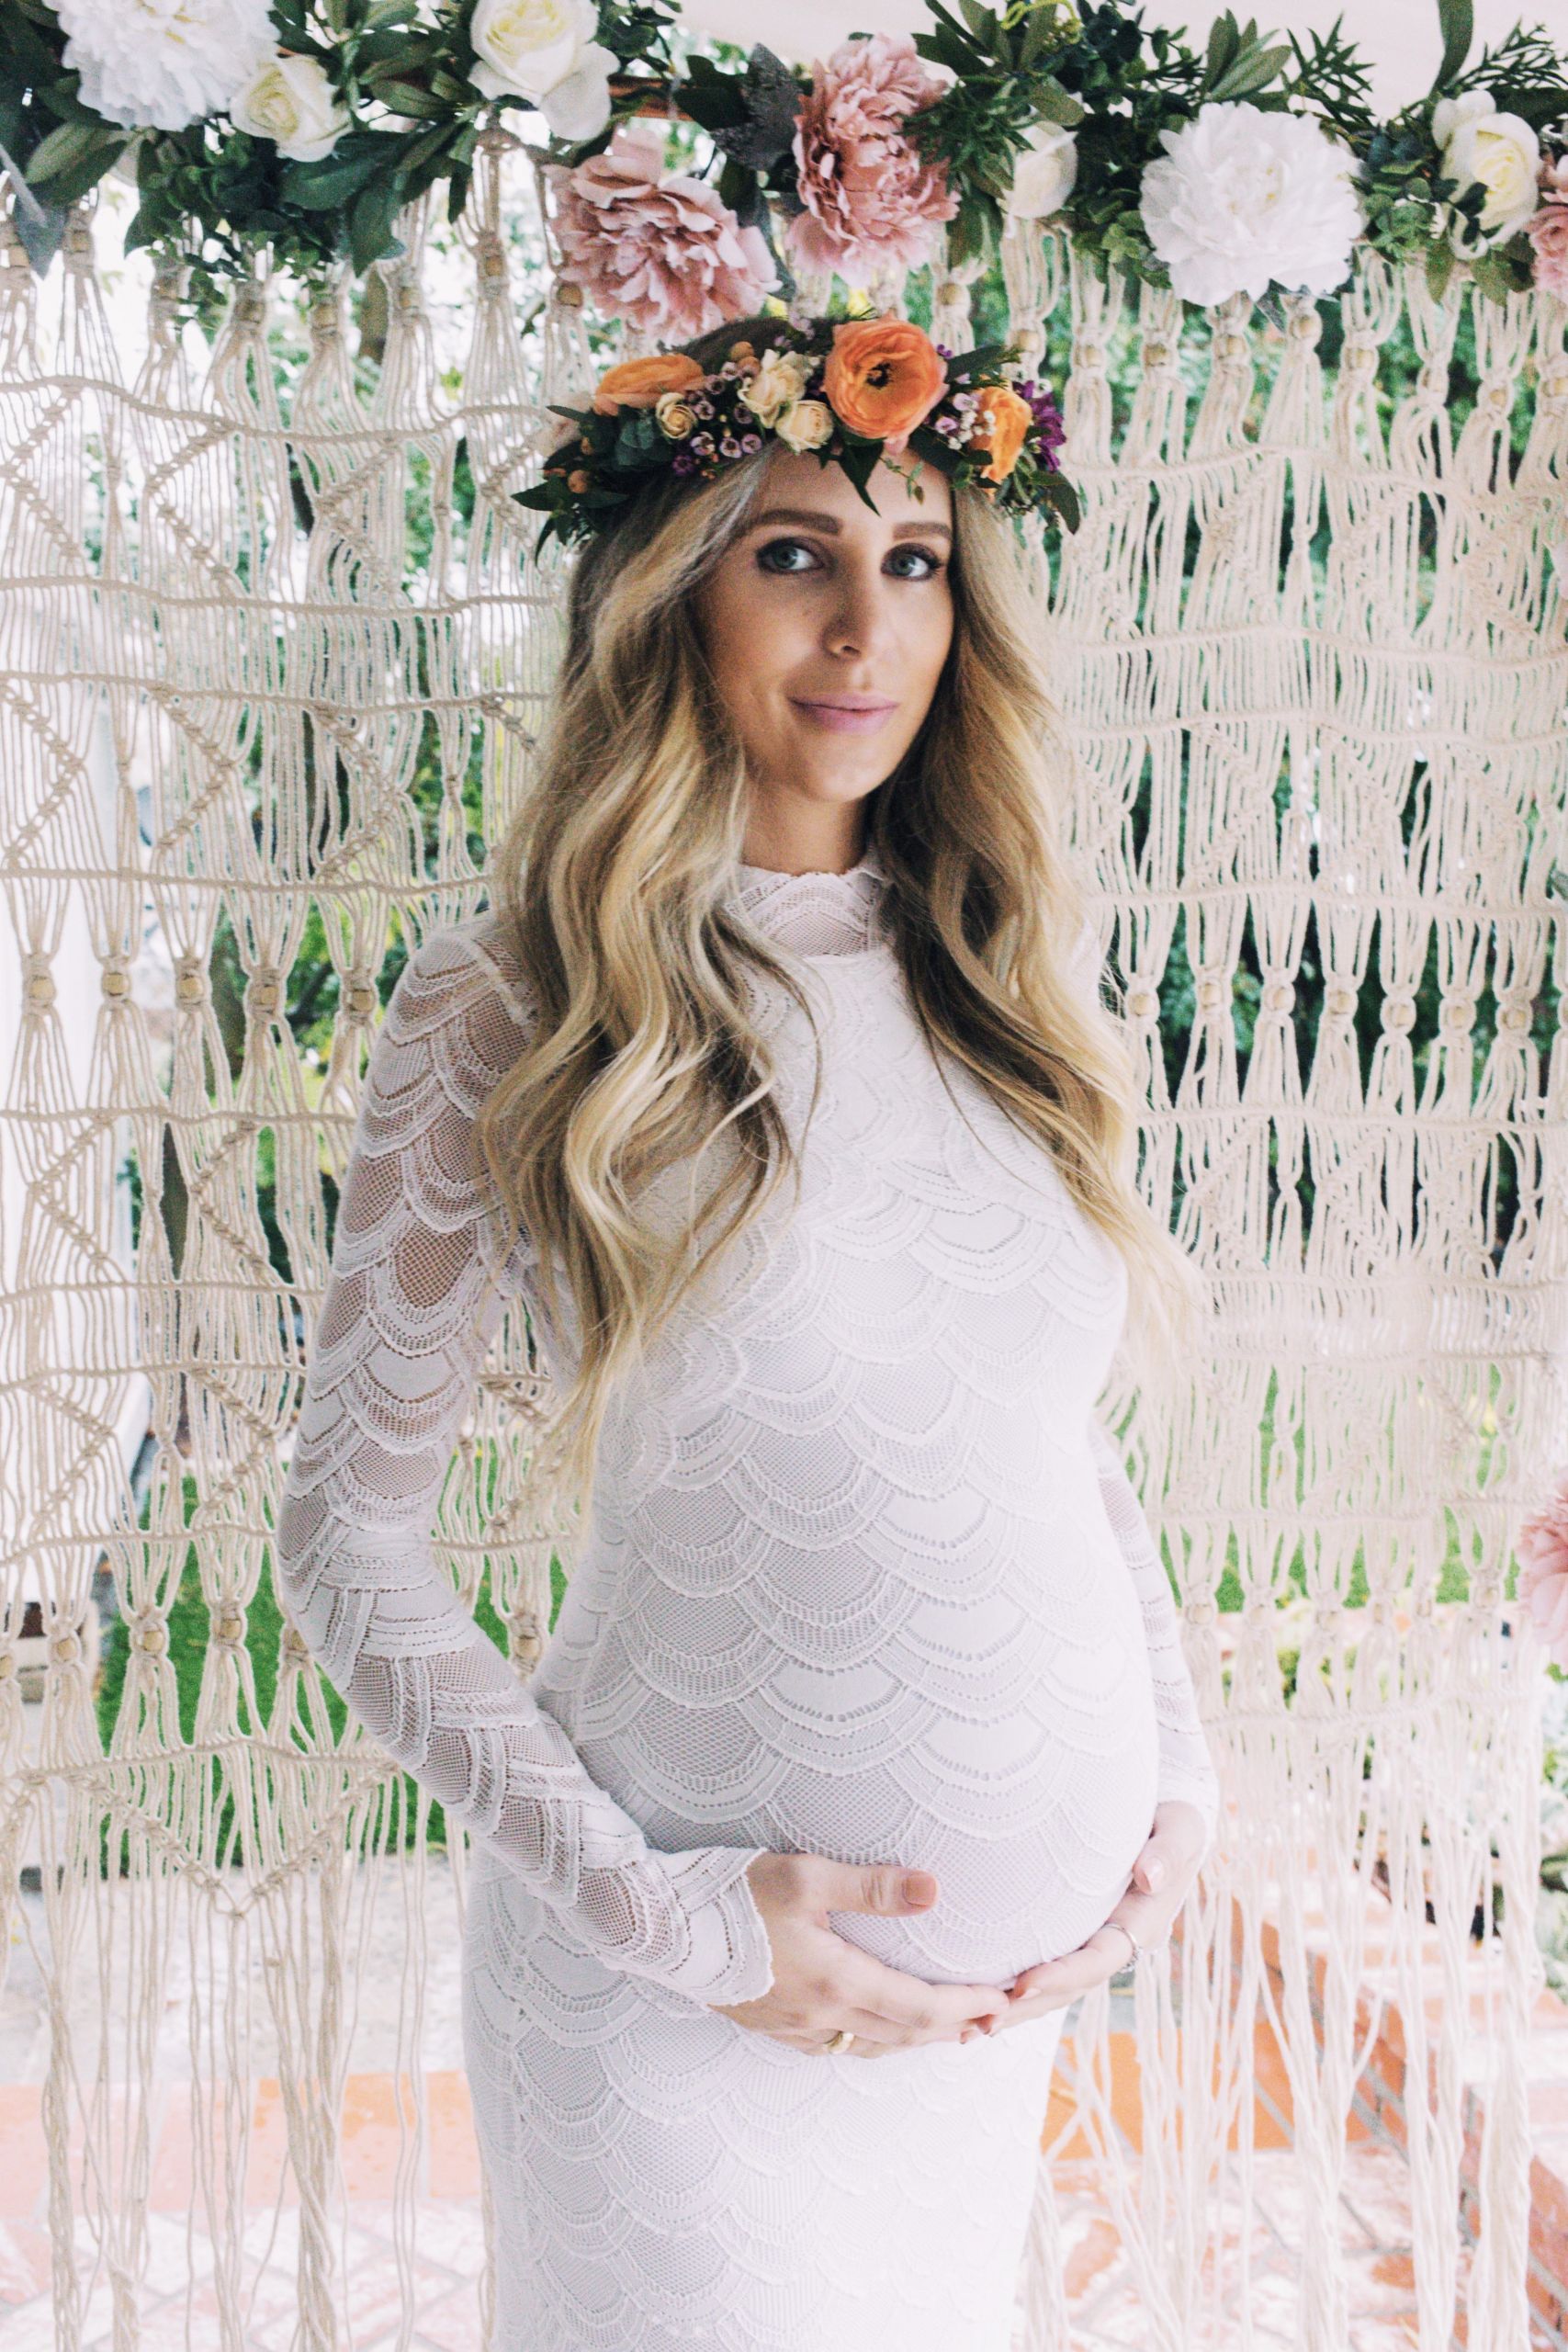 Baby Shower Dress Ideas
 A Flower Crown and White Dress Beautiful Details for